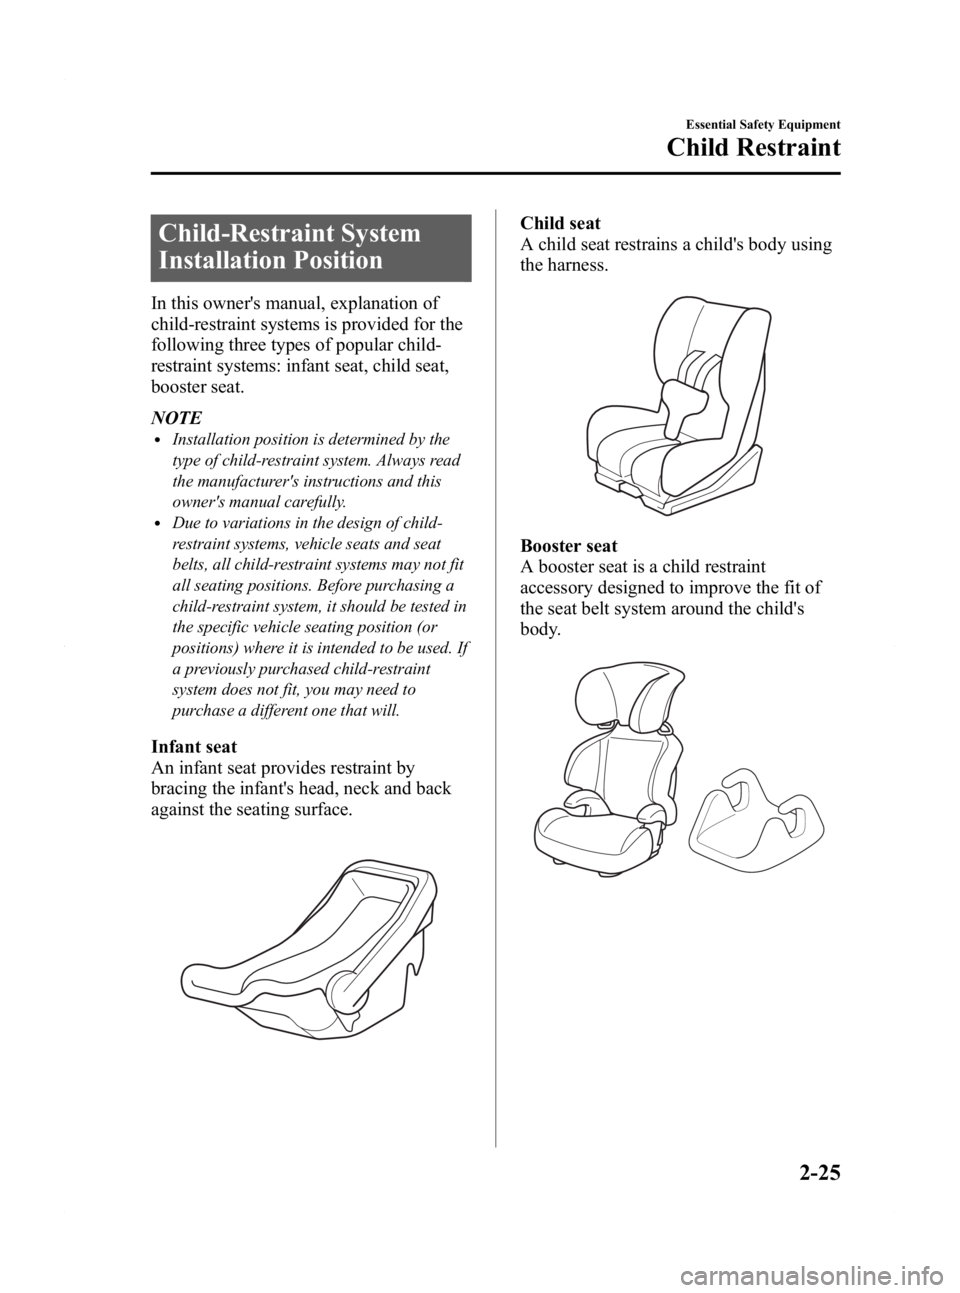 MAZDA MODEL 2 2011 Owners Guide Black plate (37,1)
Child-Restraint System
Installation Position
In this owners manual, explanation of
child-restraint systems is provided for the
following three types of popular child-
restraint sys